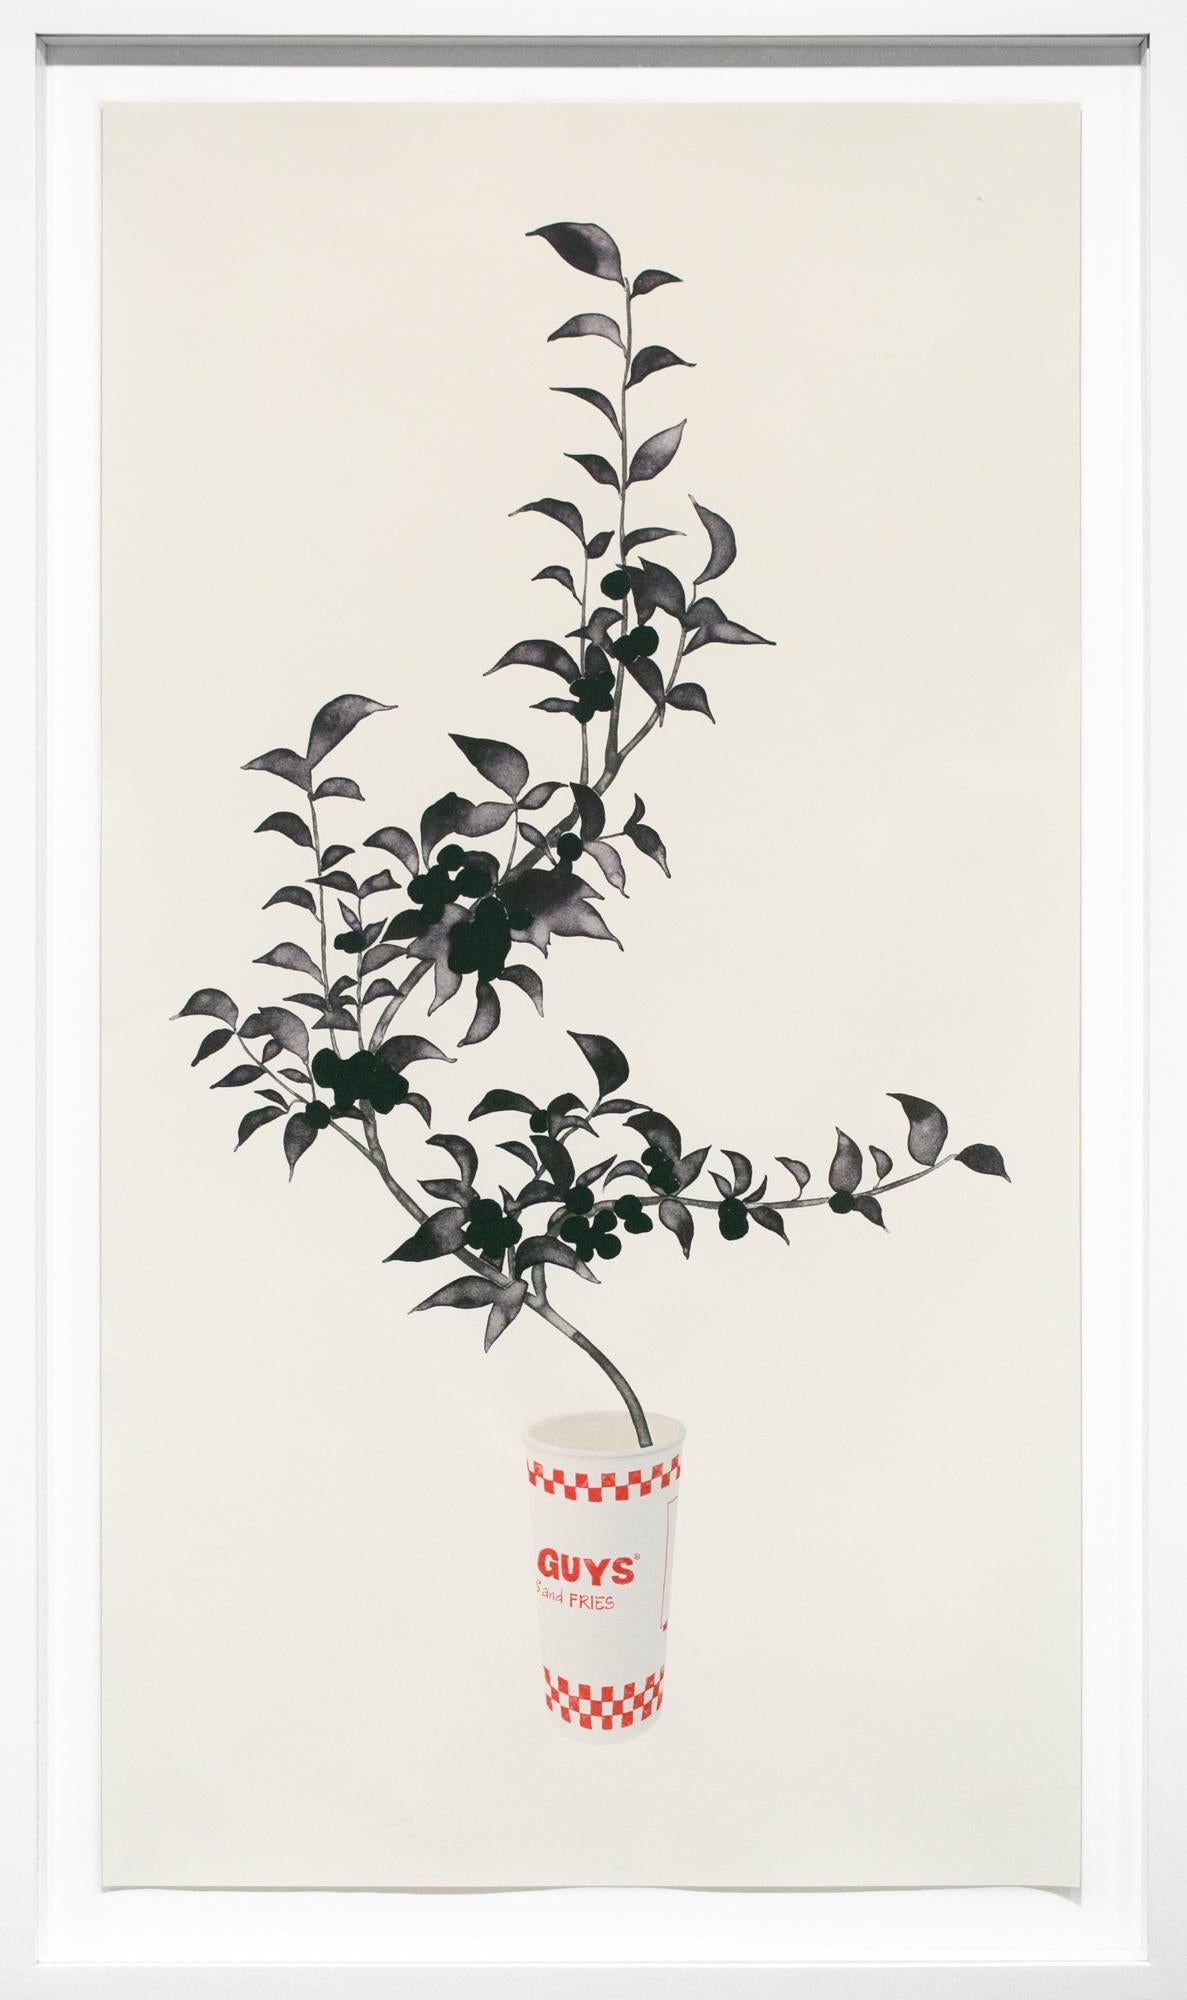 Yoonmi Nam Figurative Print - "Guys and Fries", Lithograph Print, Floral Plant, Fast Food Cup